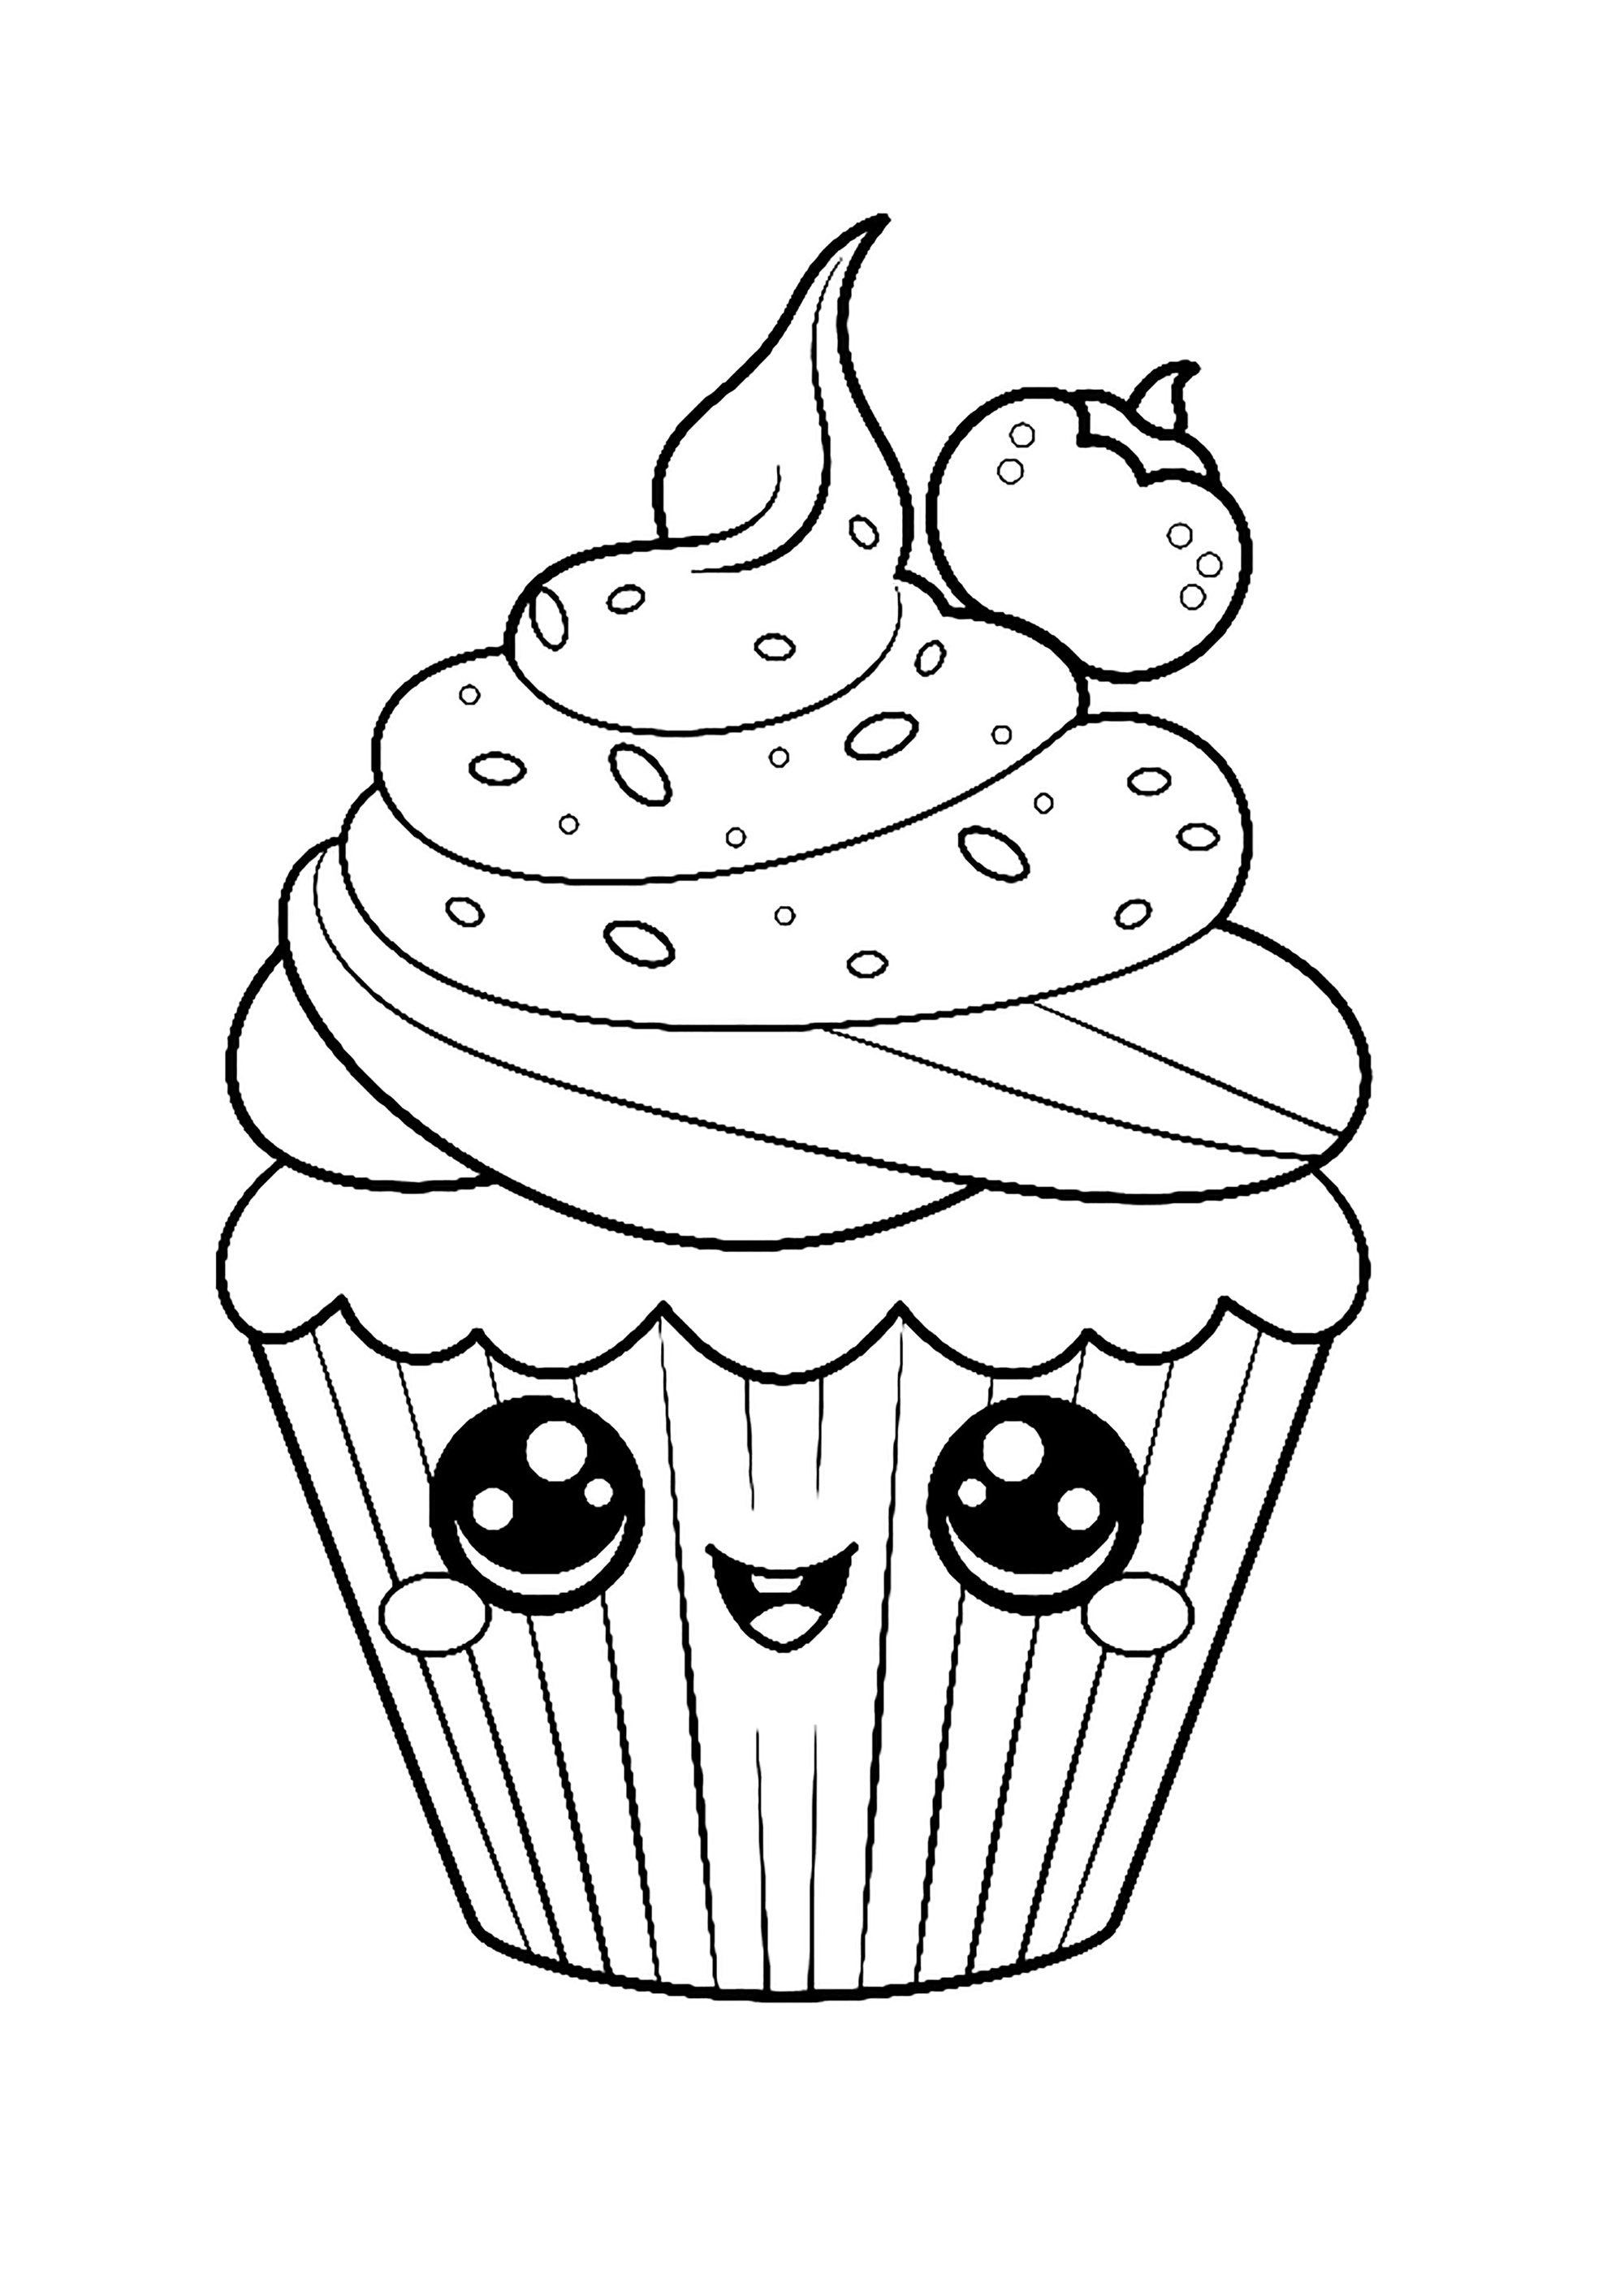 Cupcake mignon sans arriere plan - Cupcakes And Cakes Kids Coloring Pages